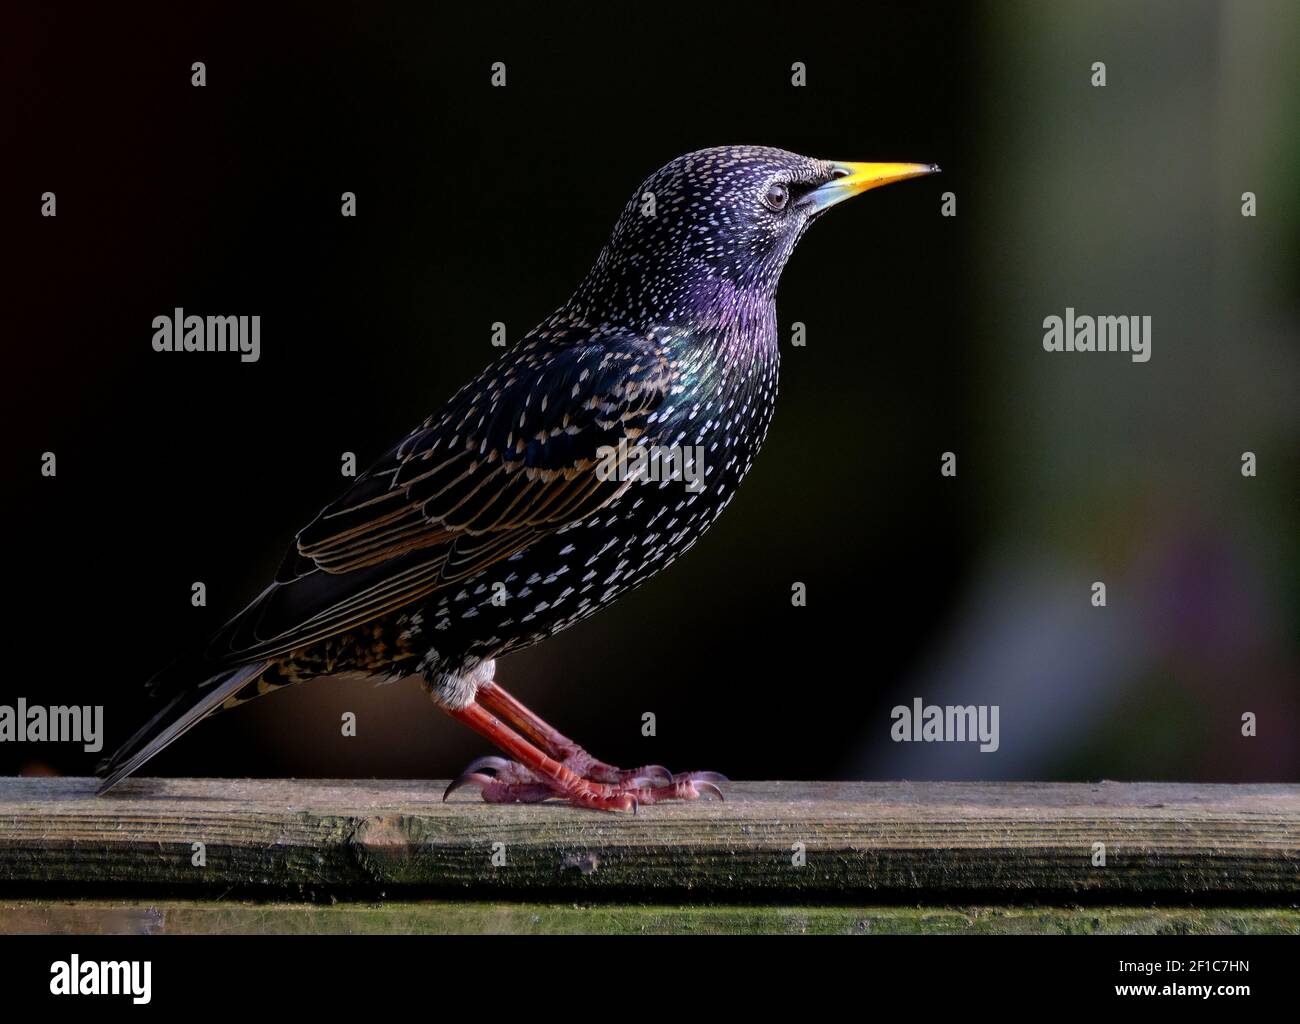 how did the starling get its name and where does the word starling come from